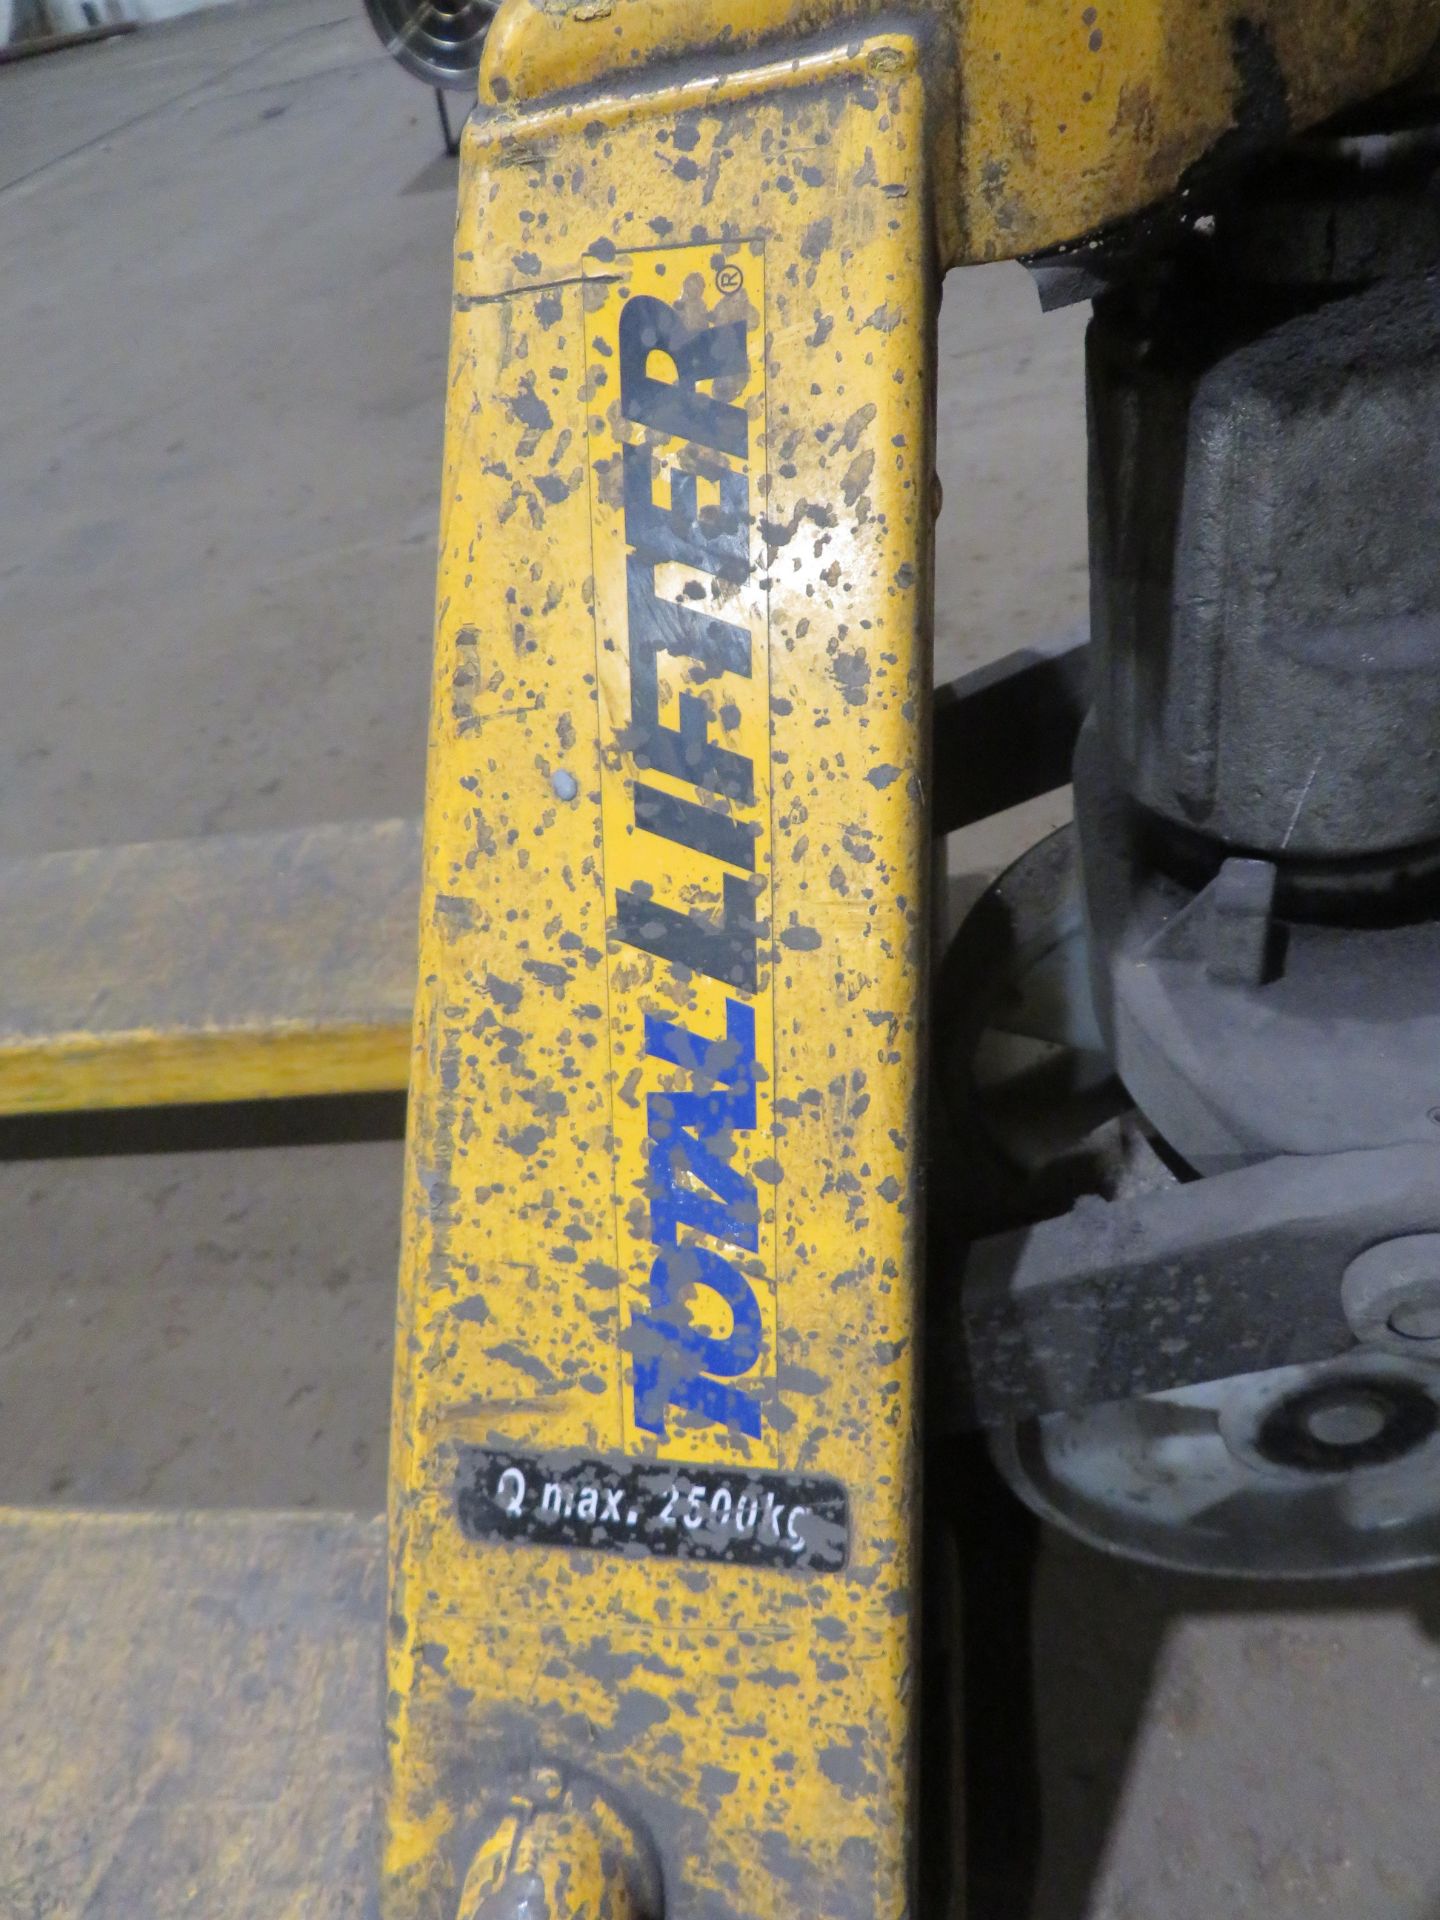 Total lifter pallet truck max 2500kg - Image 2 of 2